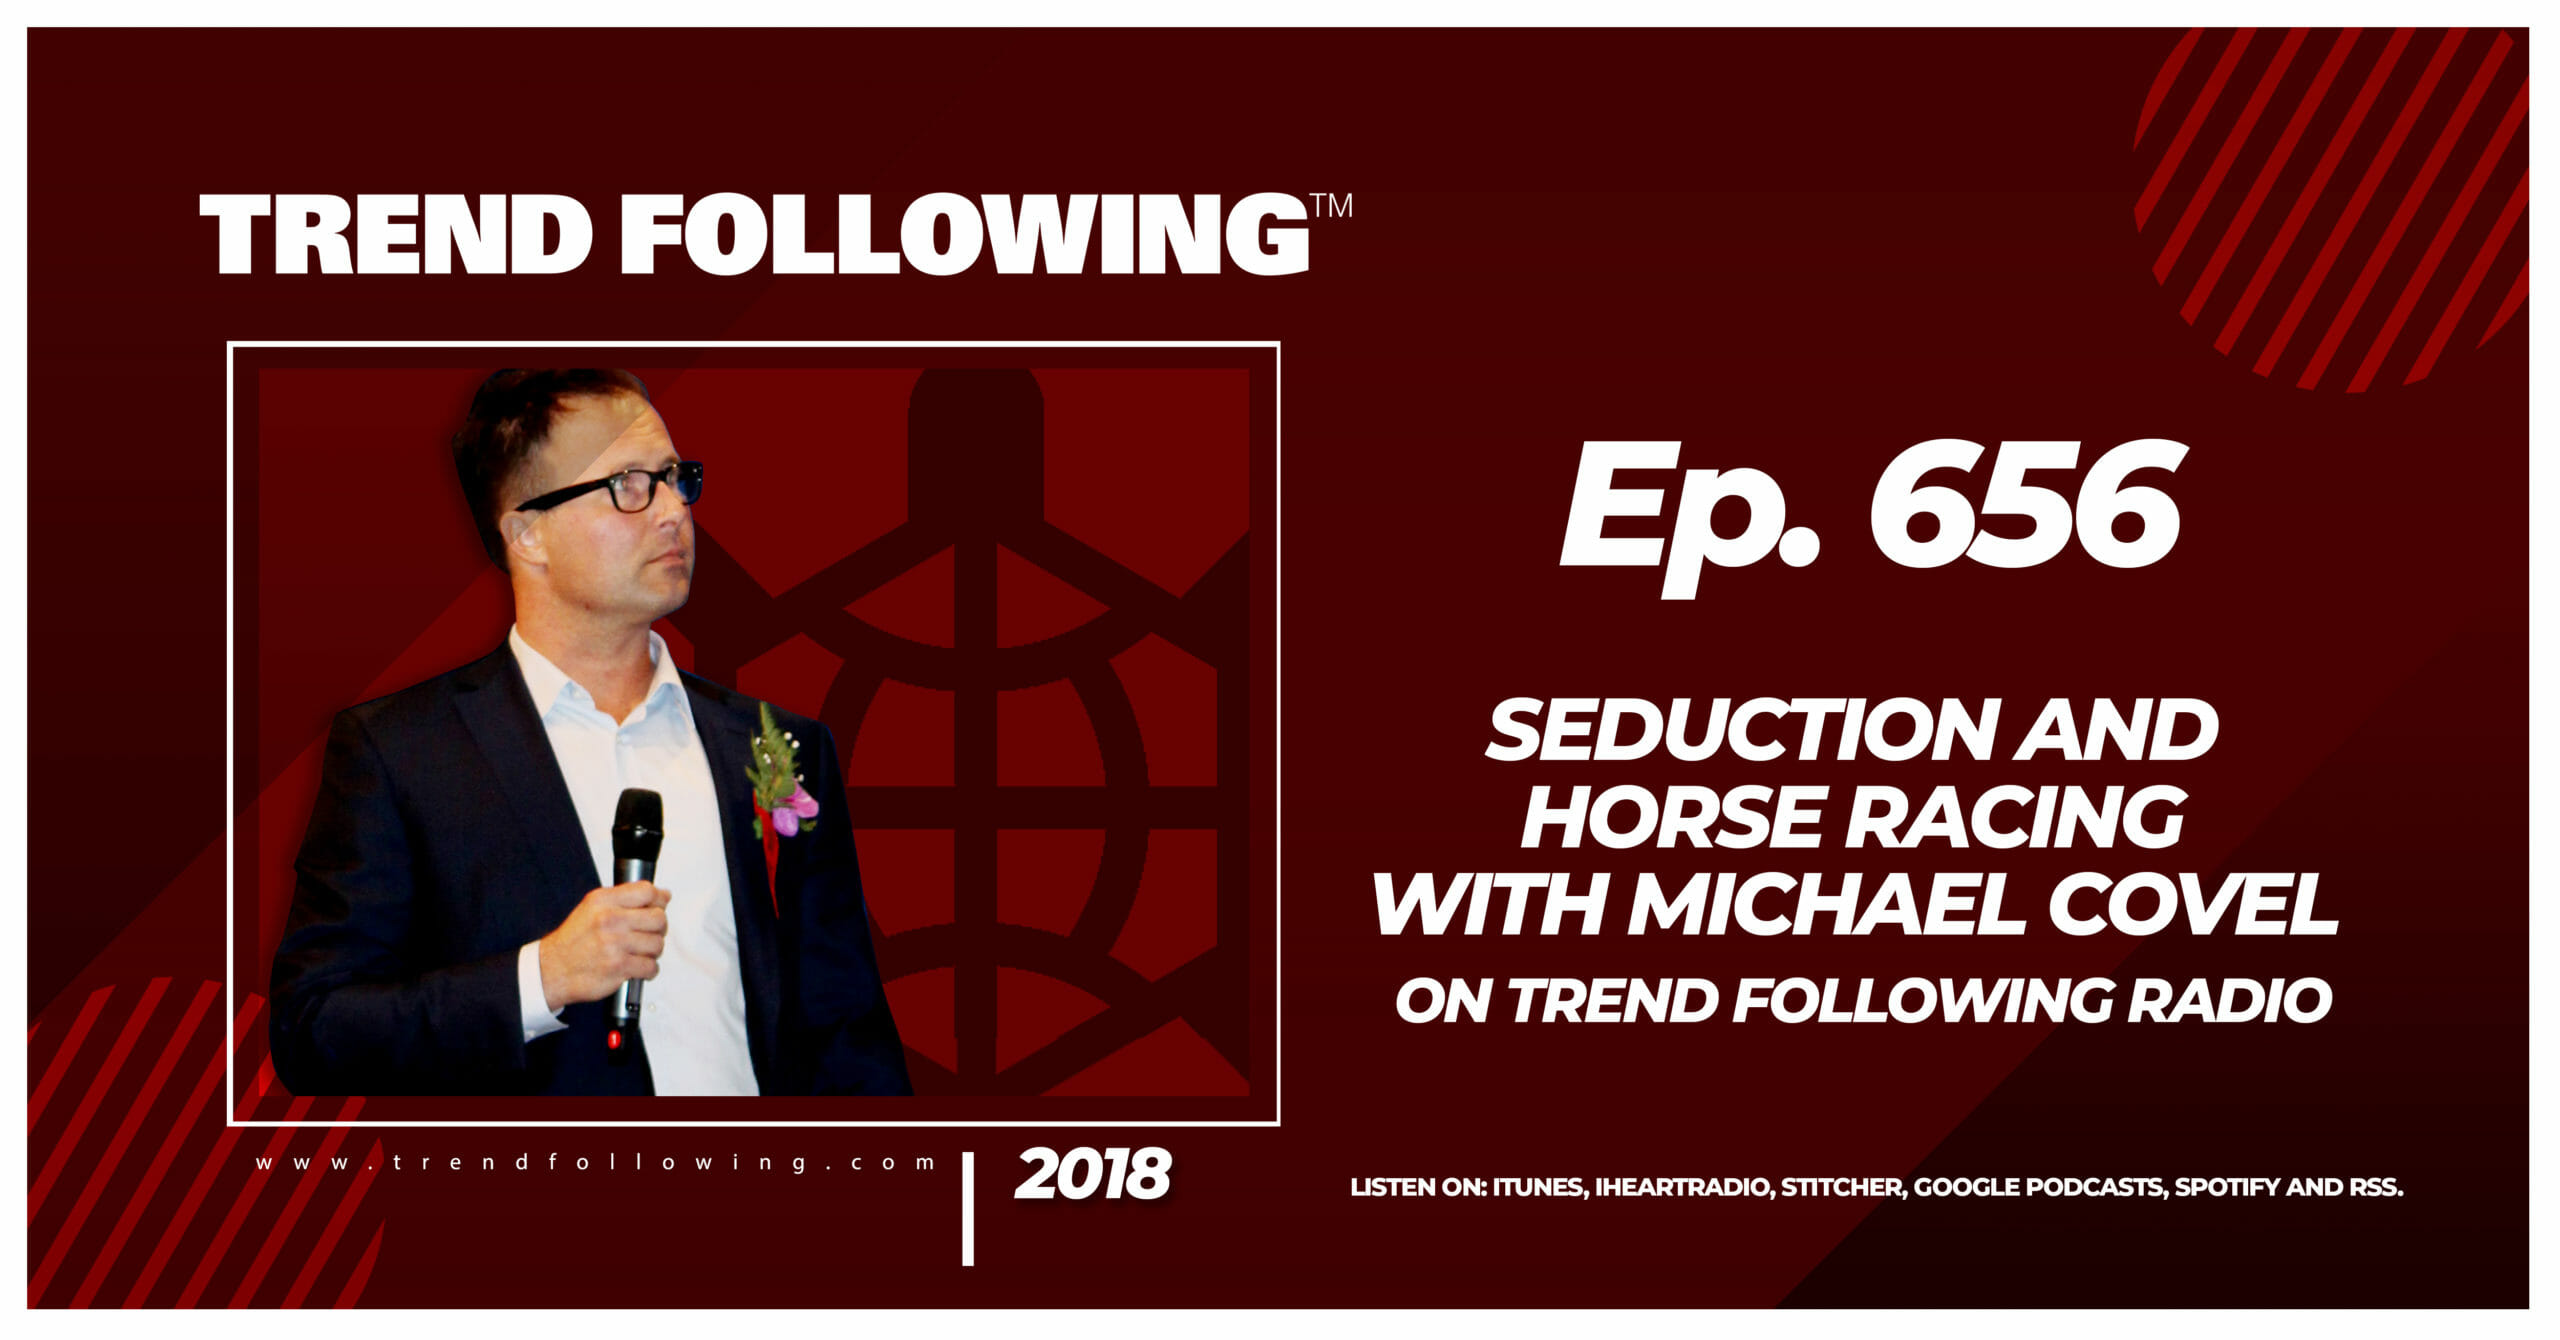 Seduction and Horse Racing with Michael Covel